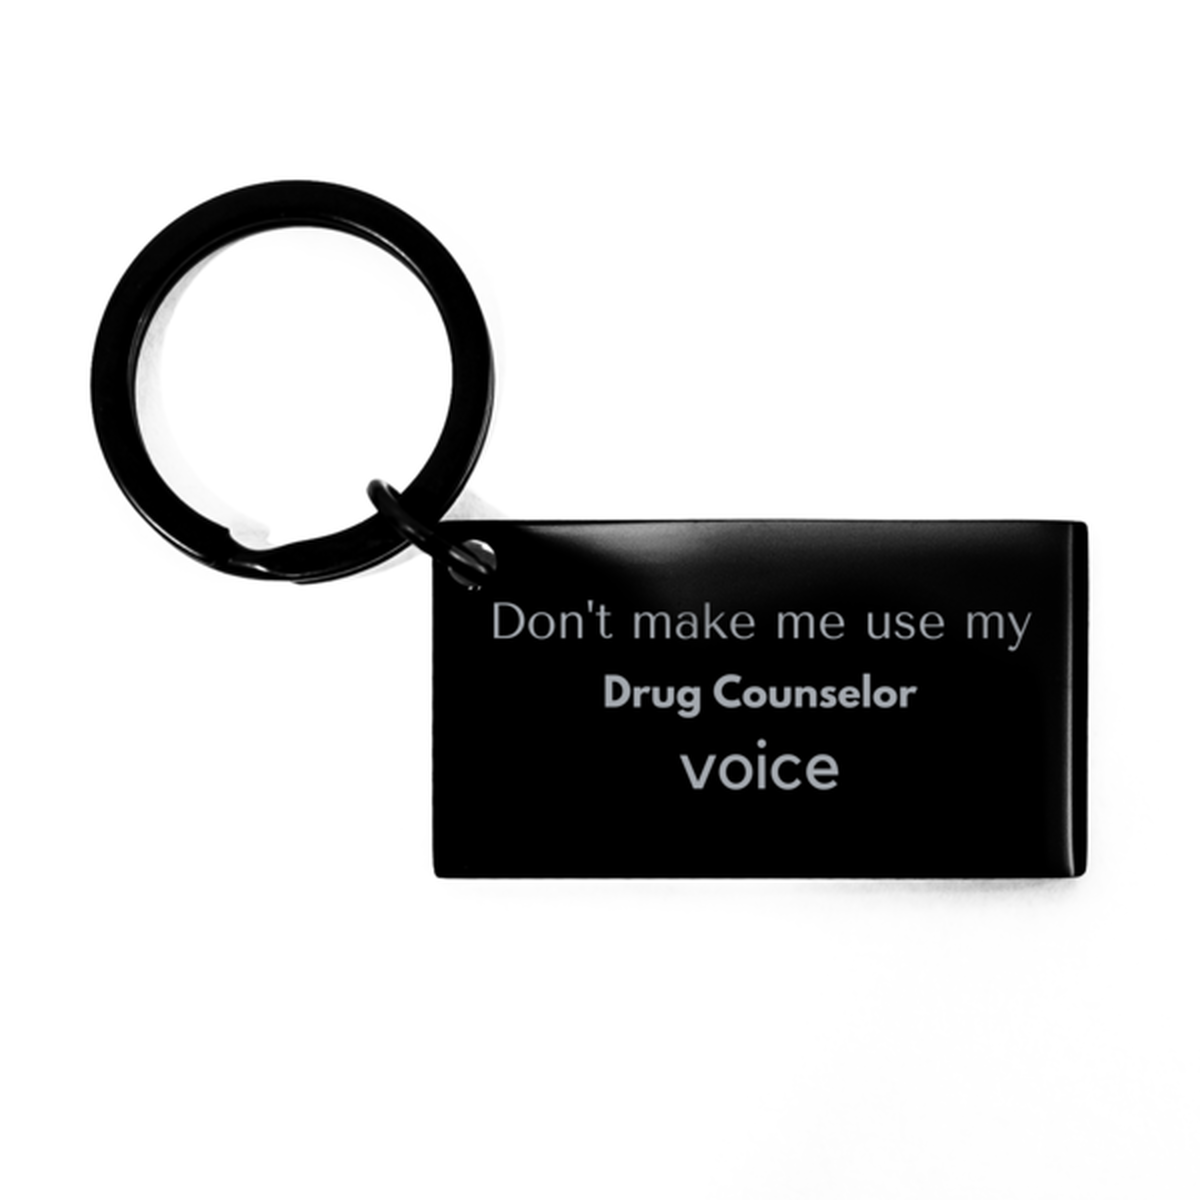 Don't make me use my Drug Counselor voice, Sarcasm Drug Counselor Gifts, Christmas Drug Counselor Keychain Birthday Unique Gifts For Drug Counselor Coworkers, Men, Women, Colleague, Friends